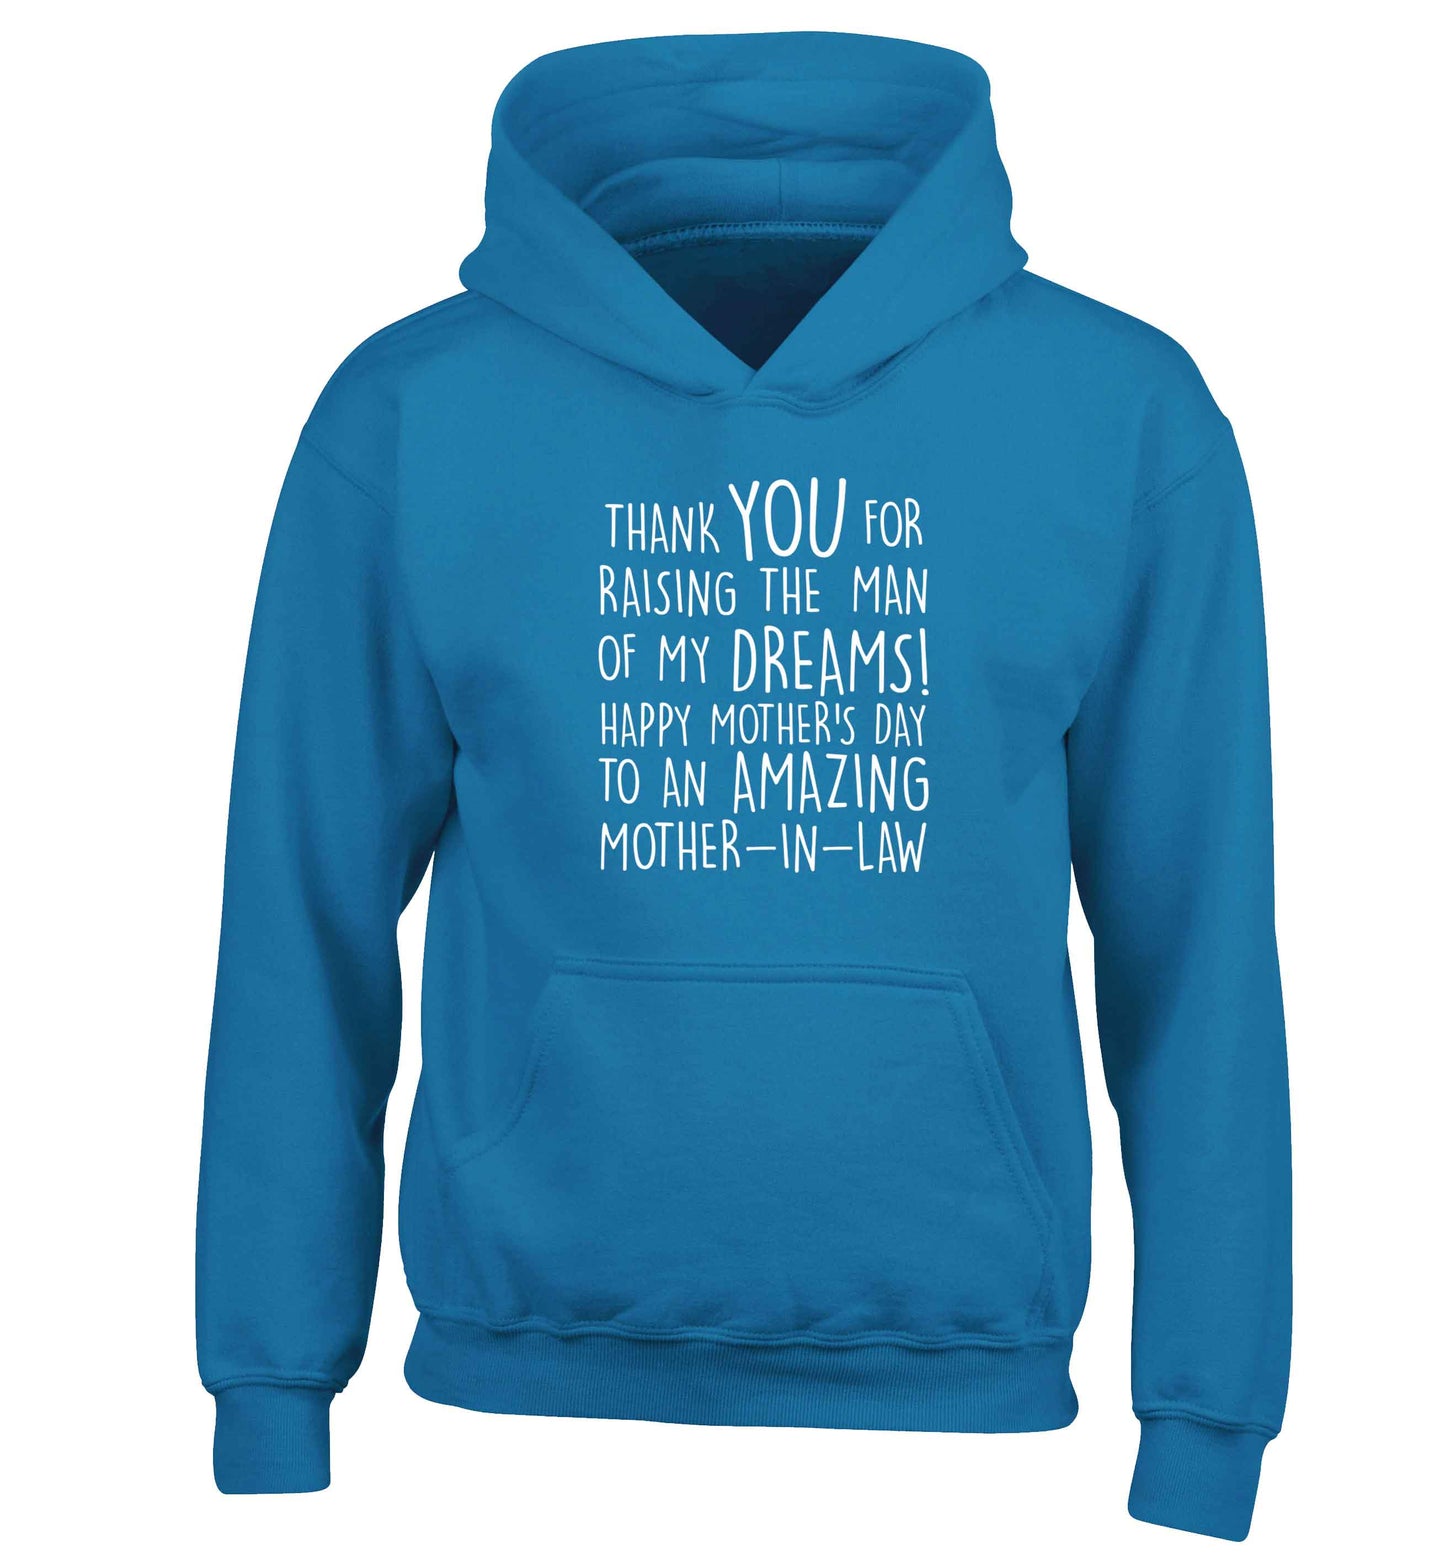 Raising the man of my dreams mother's day mother-in-law children's blue hoodie 12-13 Years